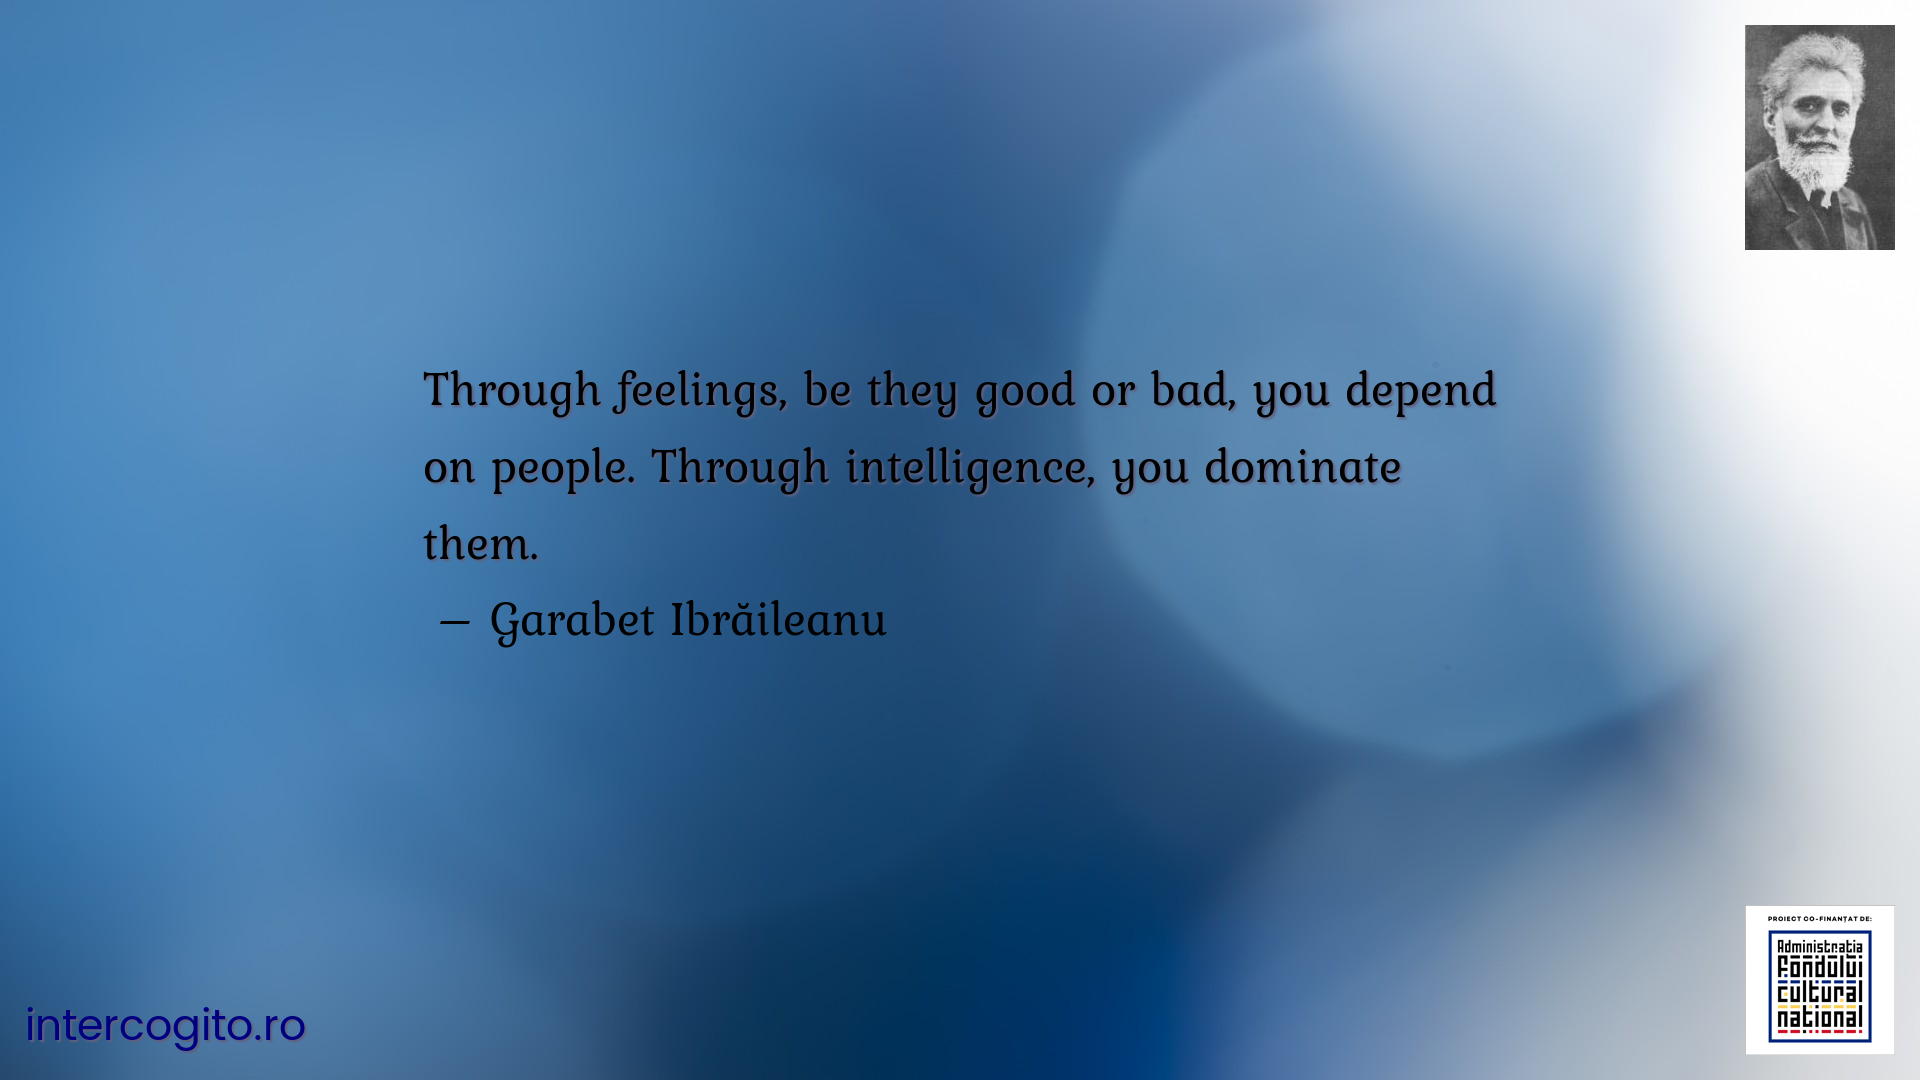 Through feelings, be they good or bad, you depend on people. Through intelligence, you dominate them.